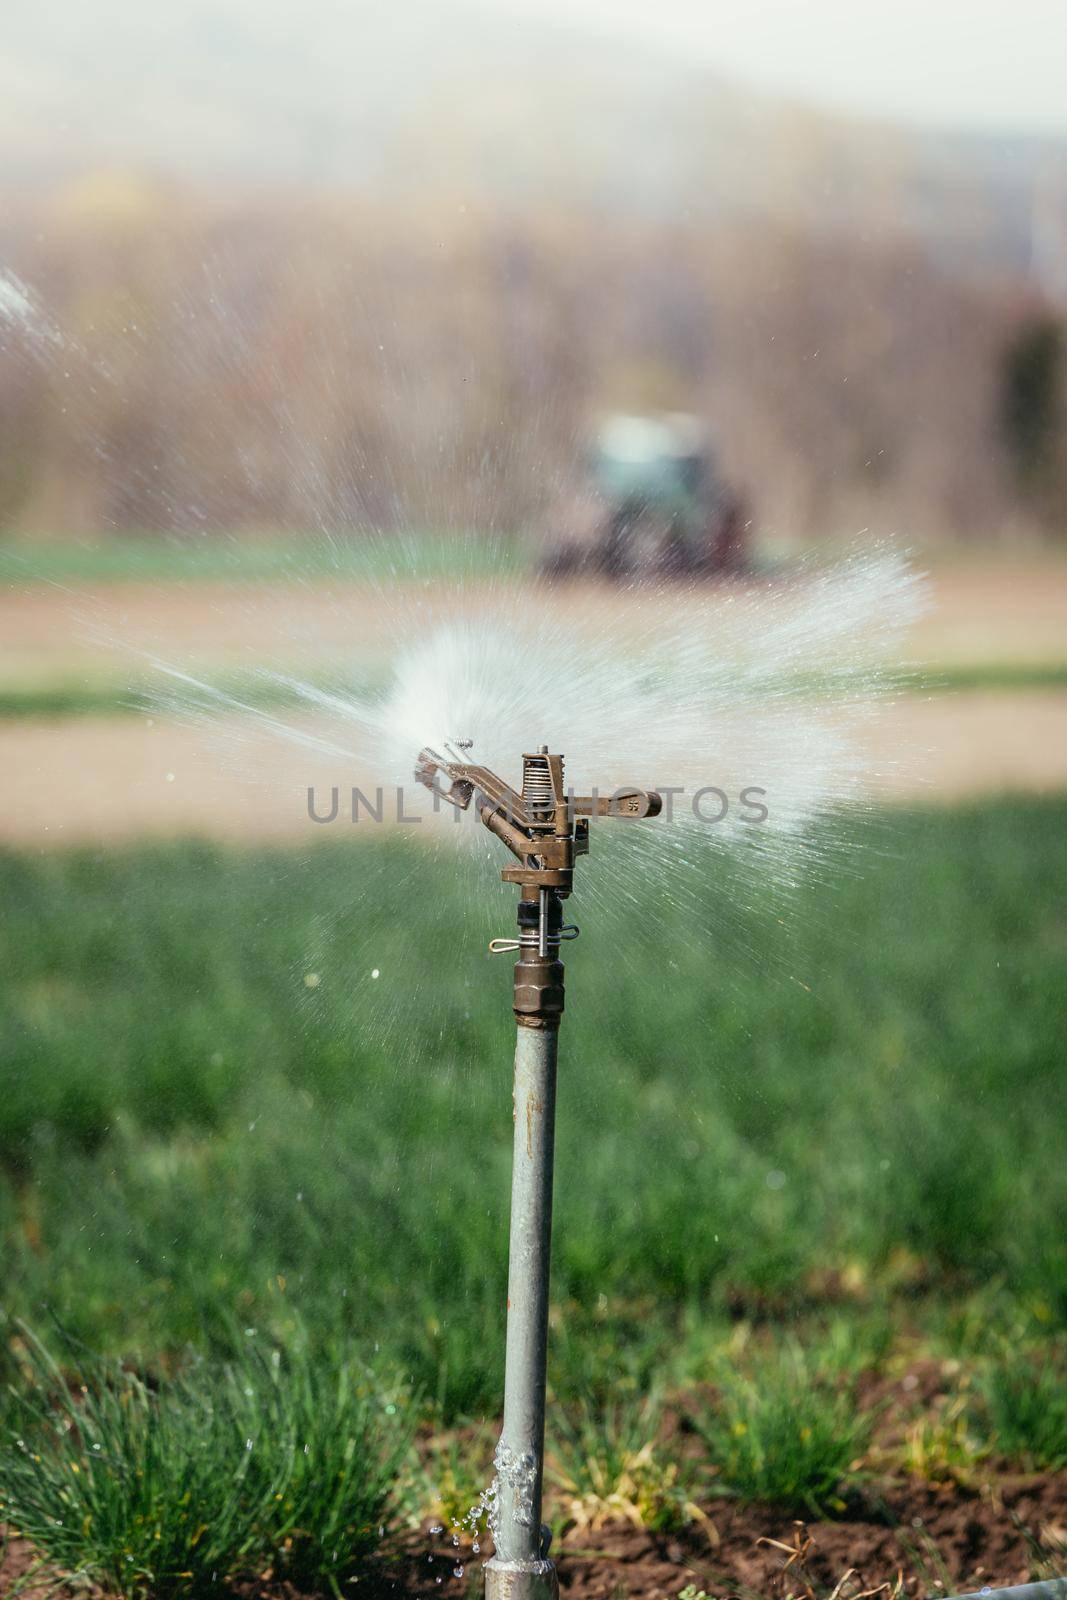 Irrigation plant on an agriculture field, tractor in the background.